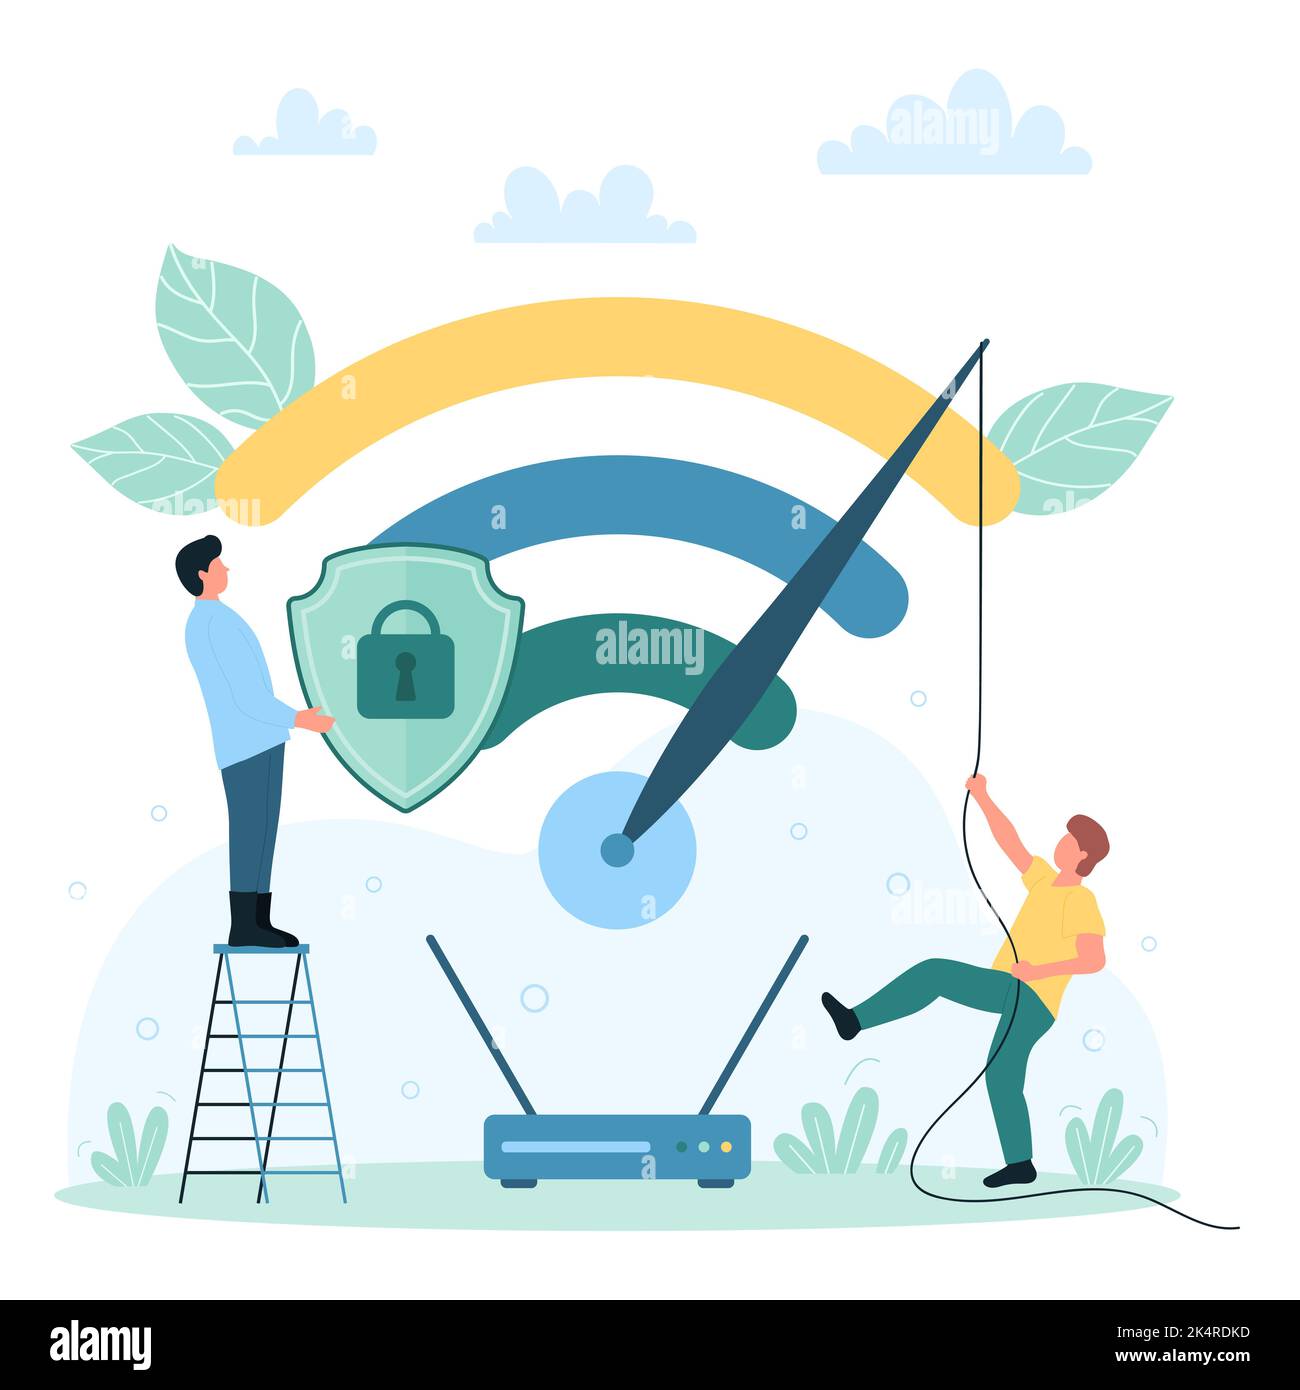 Fast wireless connection vector illustration. Cartoon tiny people holding internet security shield near router, pulling arrow on speed meter to reduce latency of WIFI signal and download data files Stock Vector